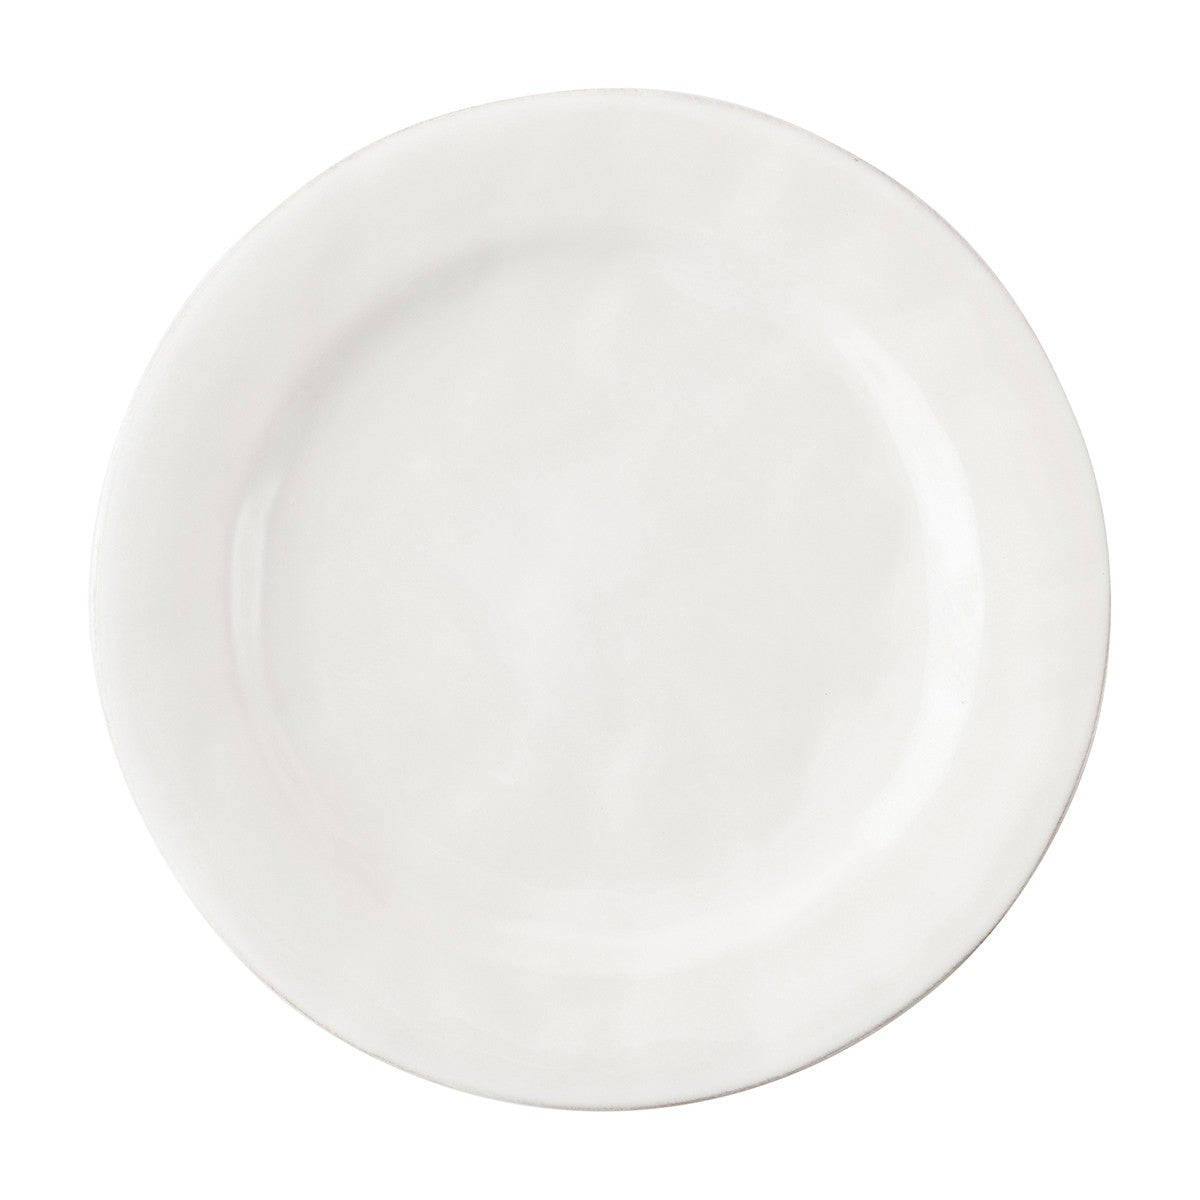 puro salad plate on a white background